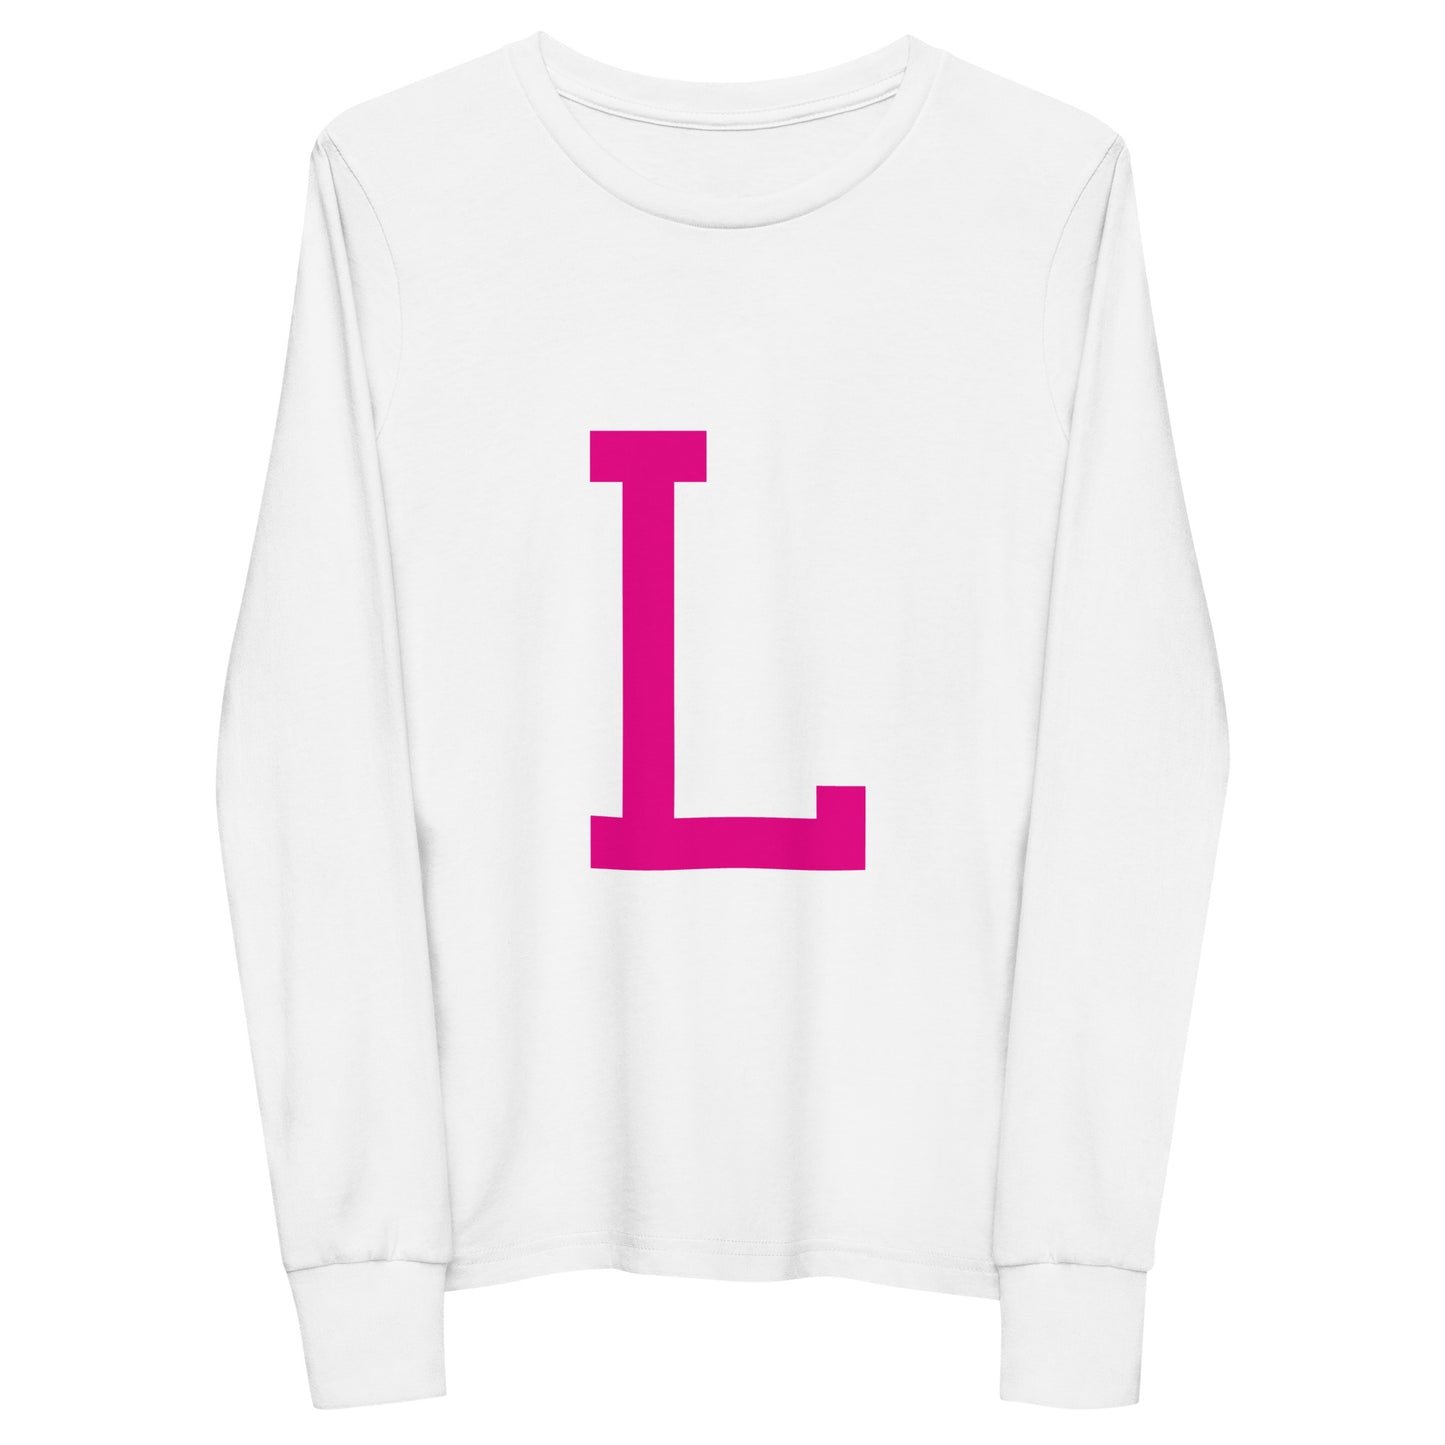 L -  Sustainably Made Kids Long Sleeve T-shirt